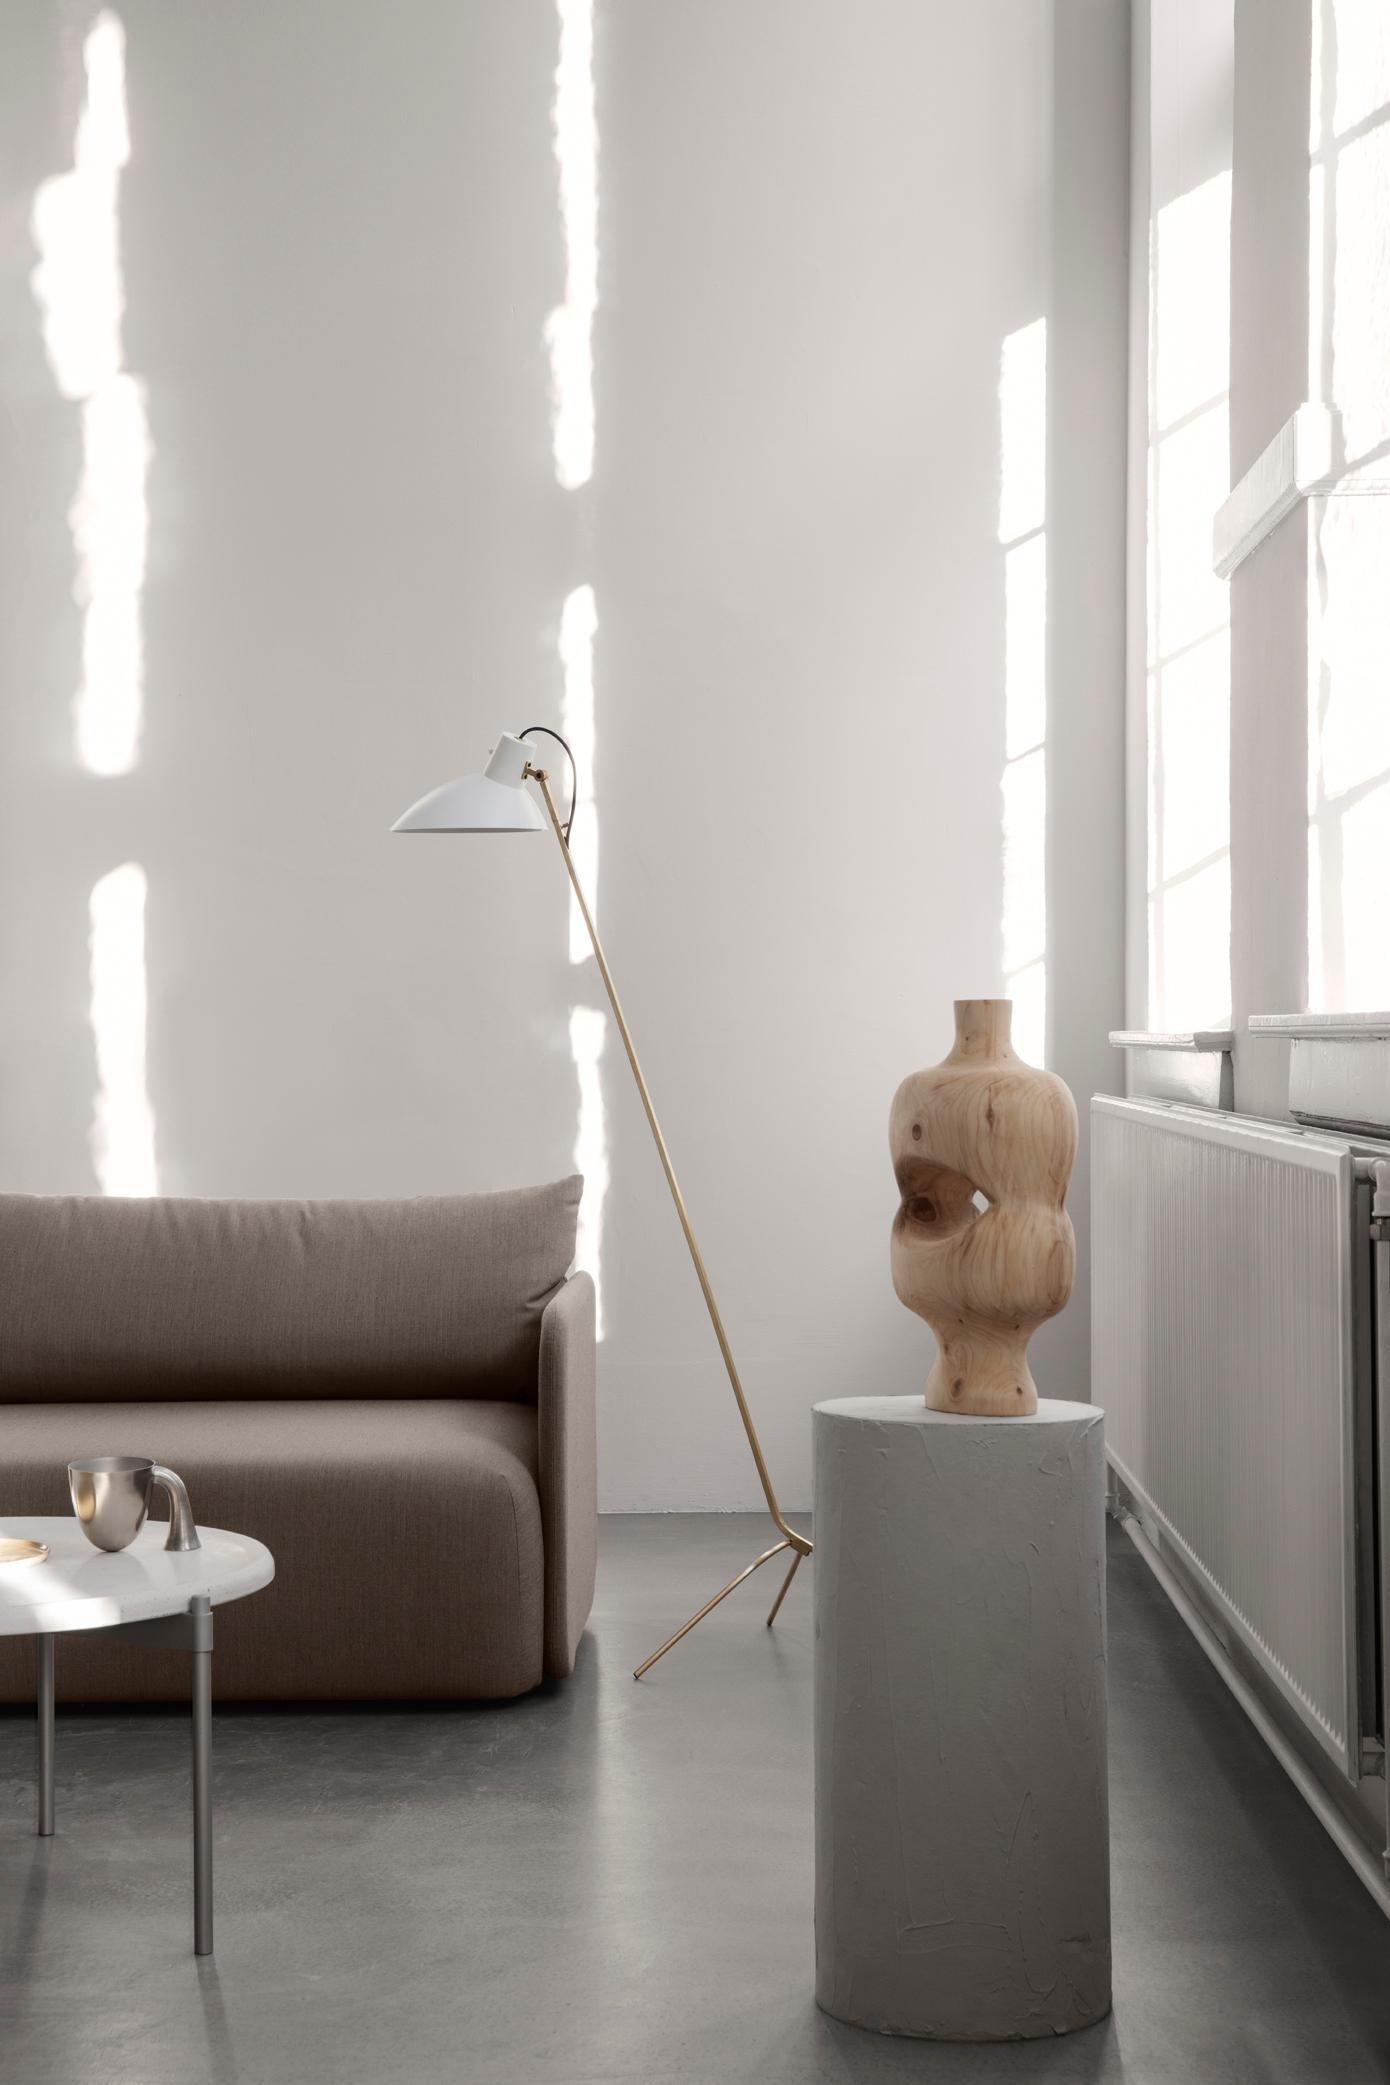 VV Cinquanta Black and Brass Floor Lamp Designed by Vittoriano Viganò for Astep 11